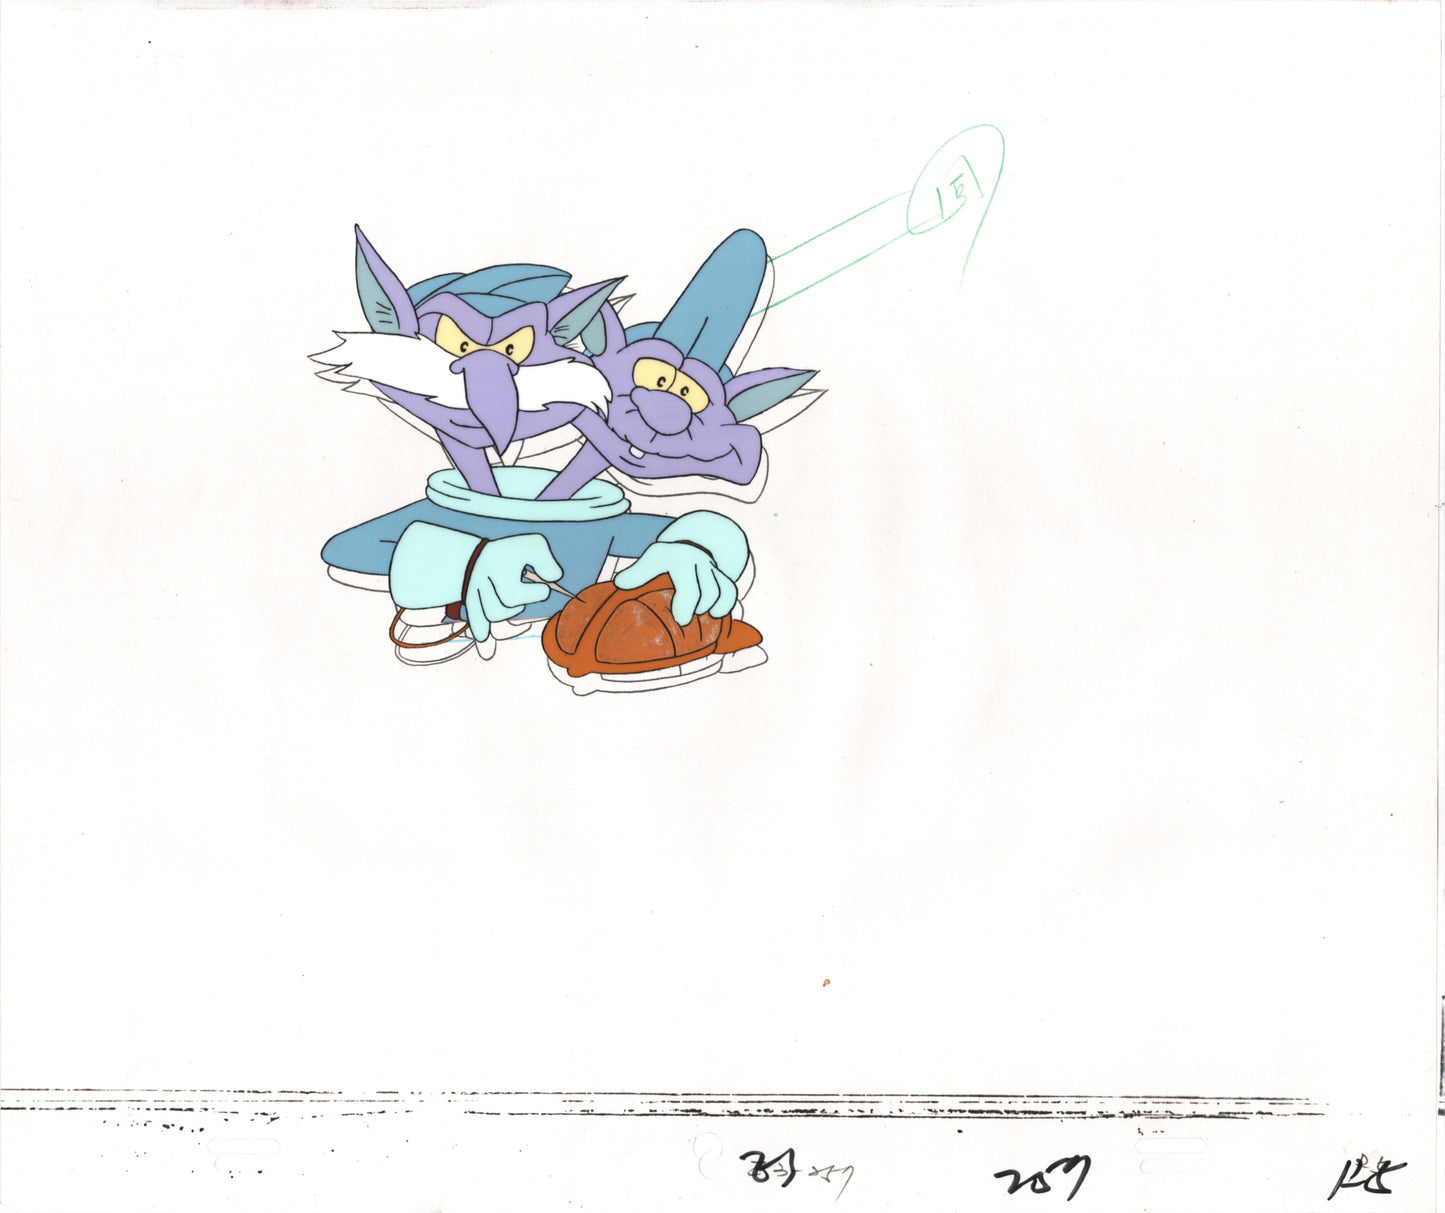 Star Wars: Ewoks Original Production Animation Cel and Drawing (drawing is stuck) from Lucasfilm C-R5